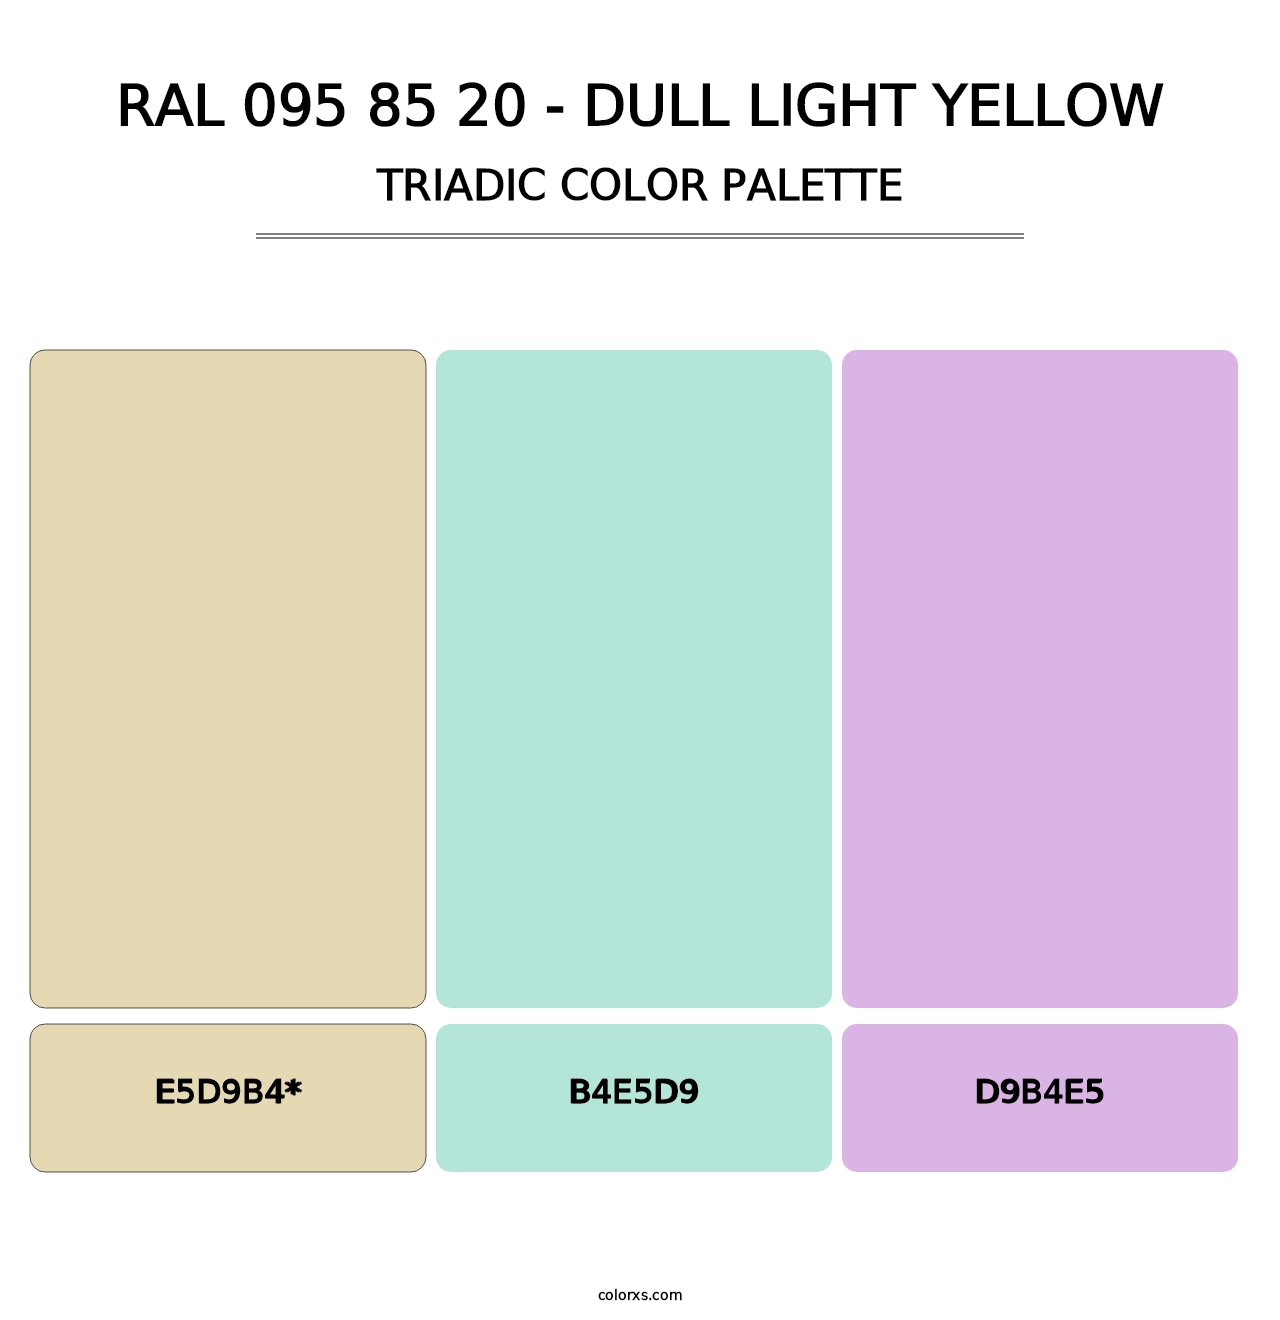 RAL 095 85 20 - Dull Light Yellow - Triadic Color Palette